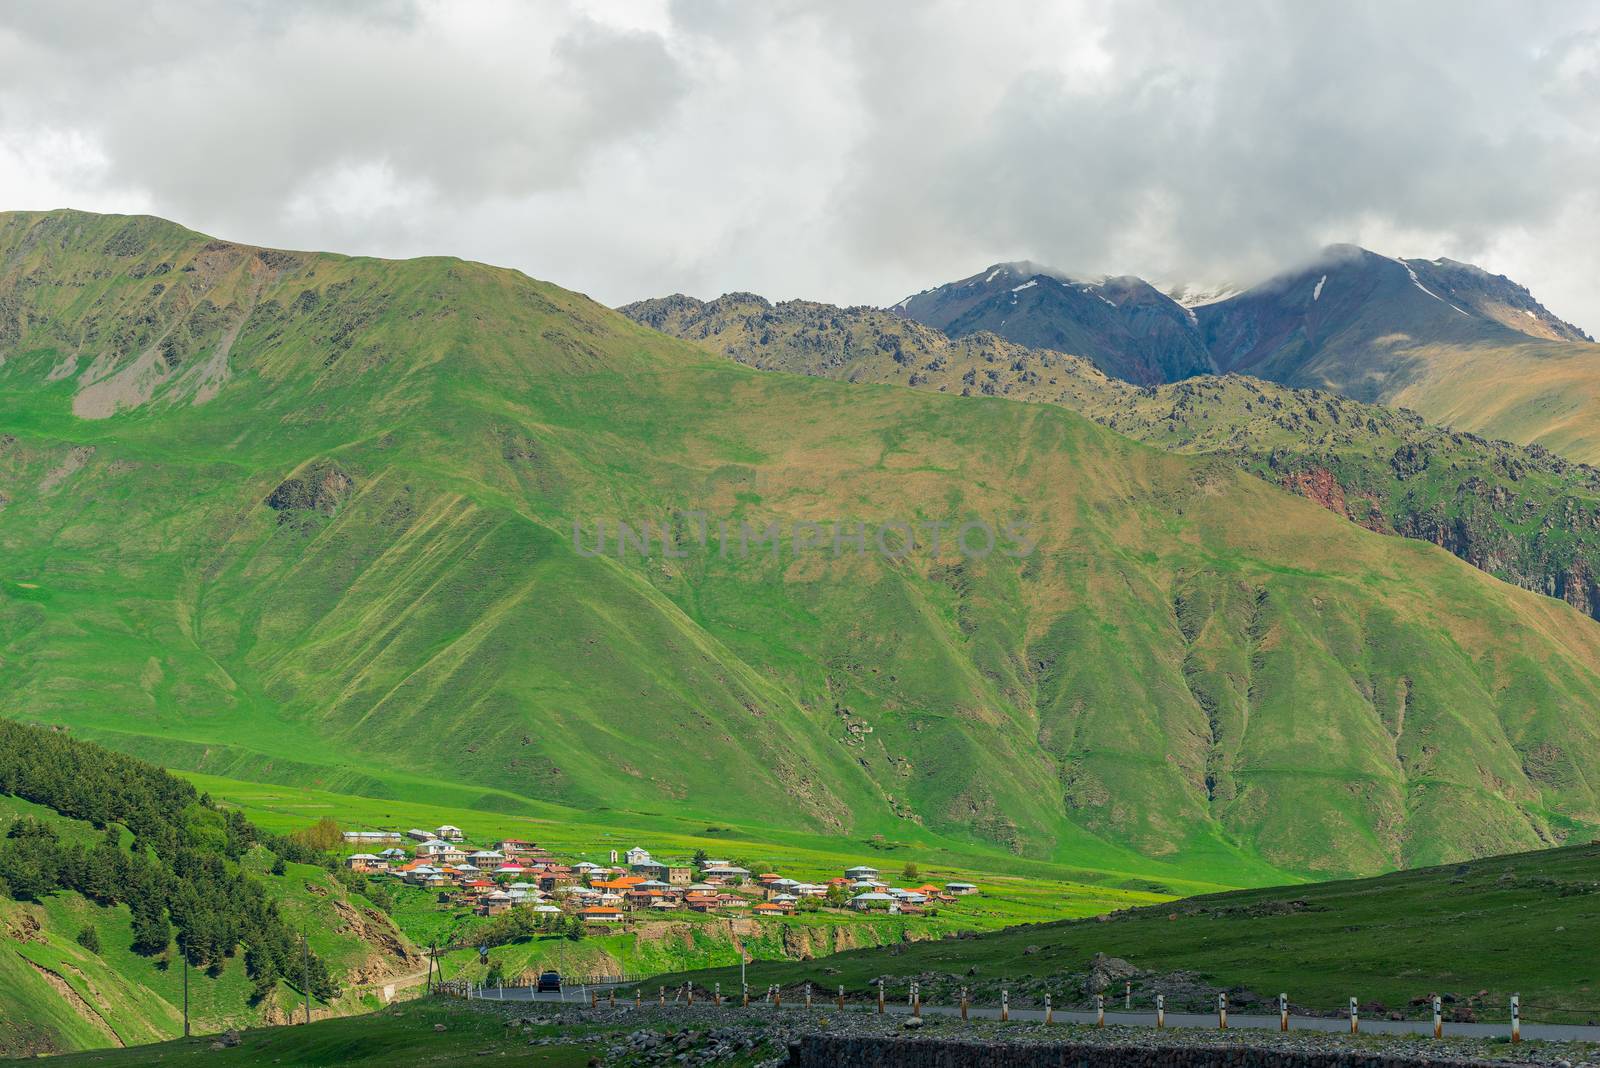 Village in Georgia on a plateau near the high mountains of the Caucasus